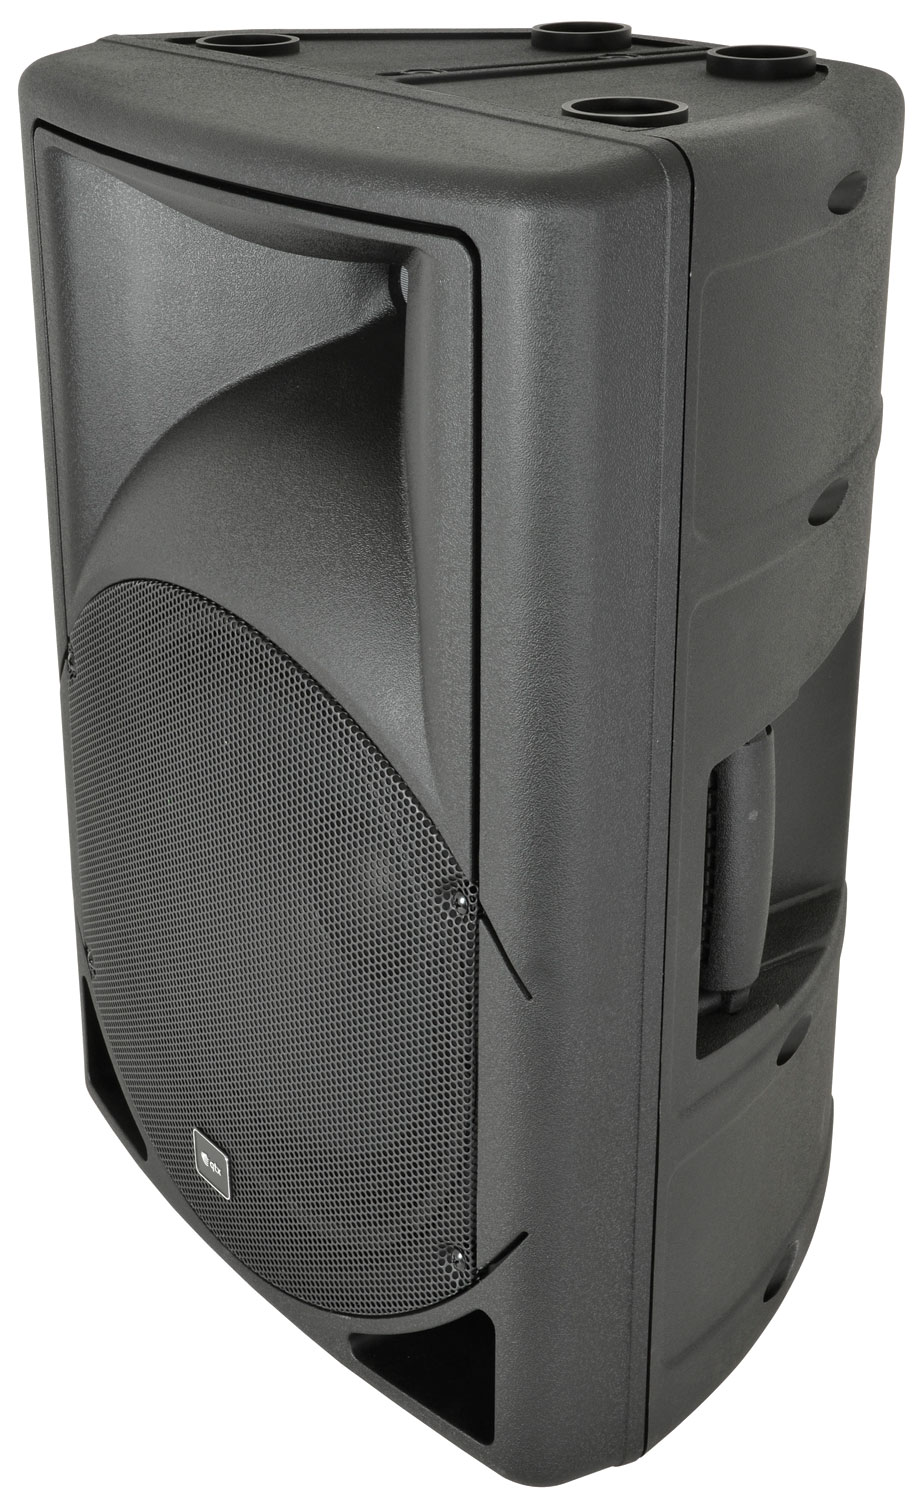 Qs Series Passive Moulded Speaker Cabinets Minster Electronics